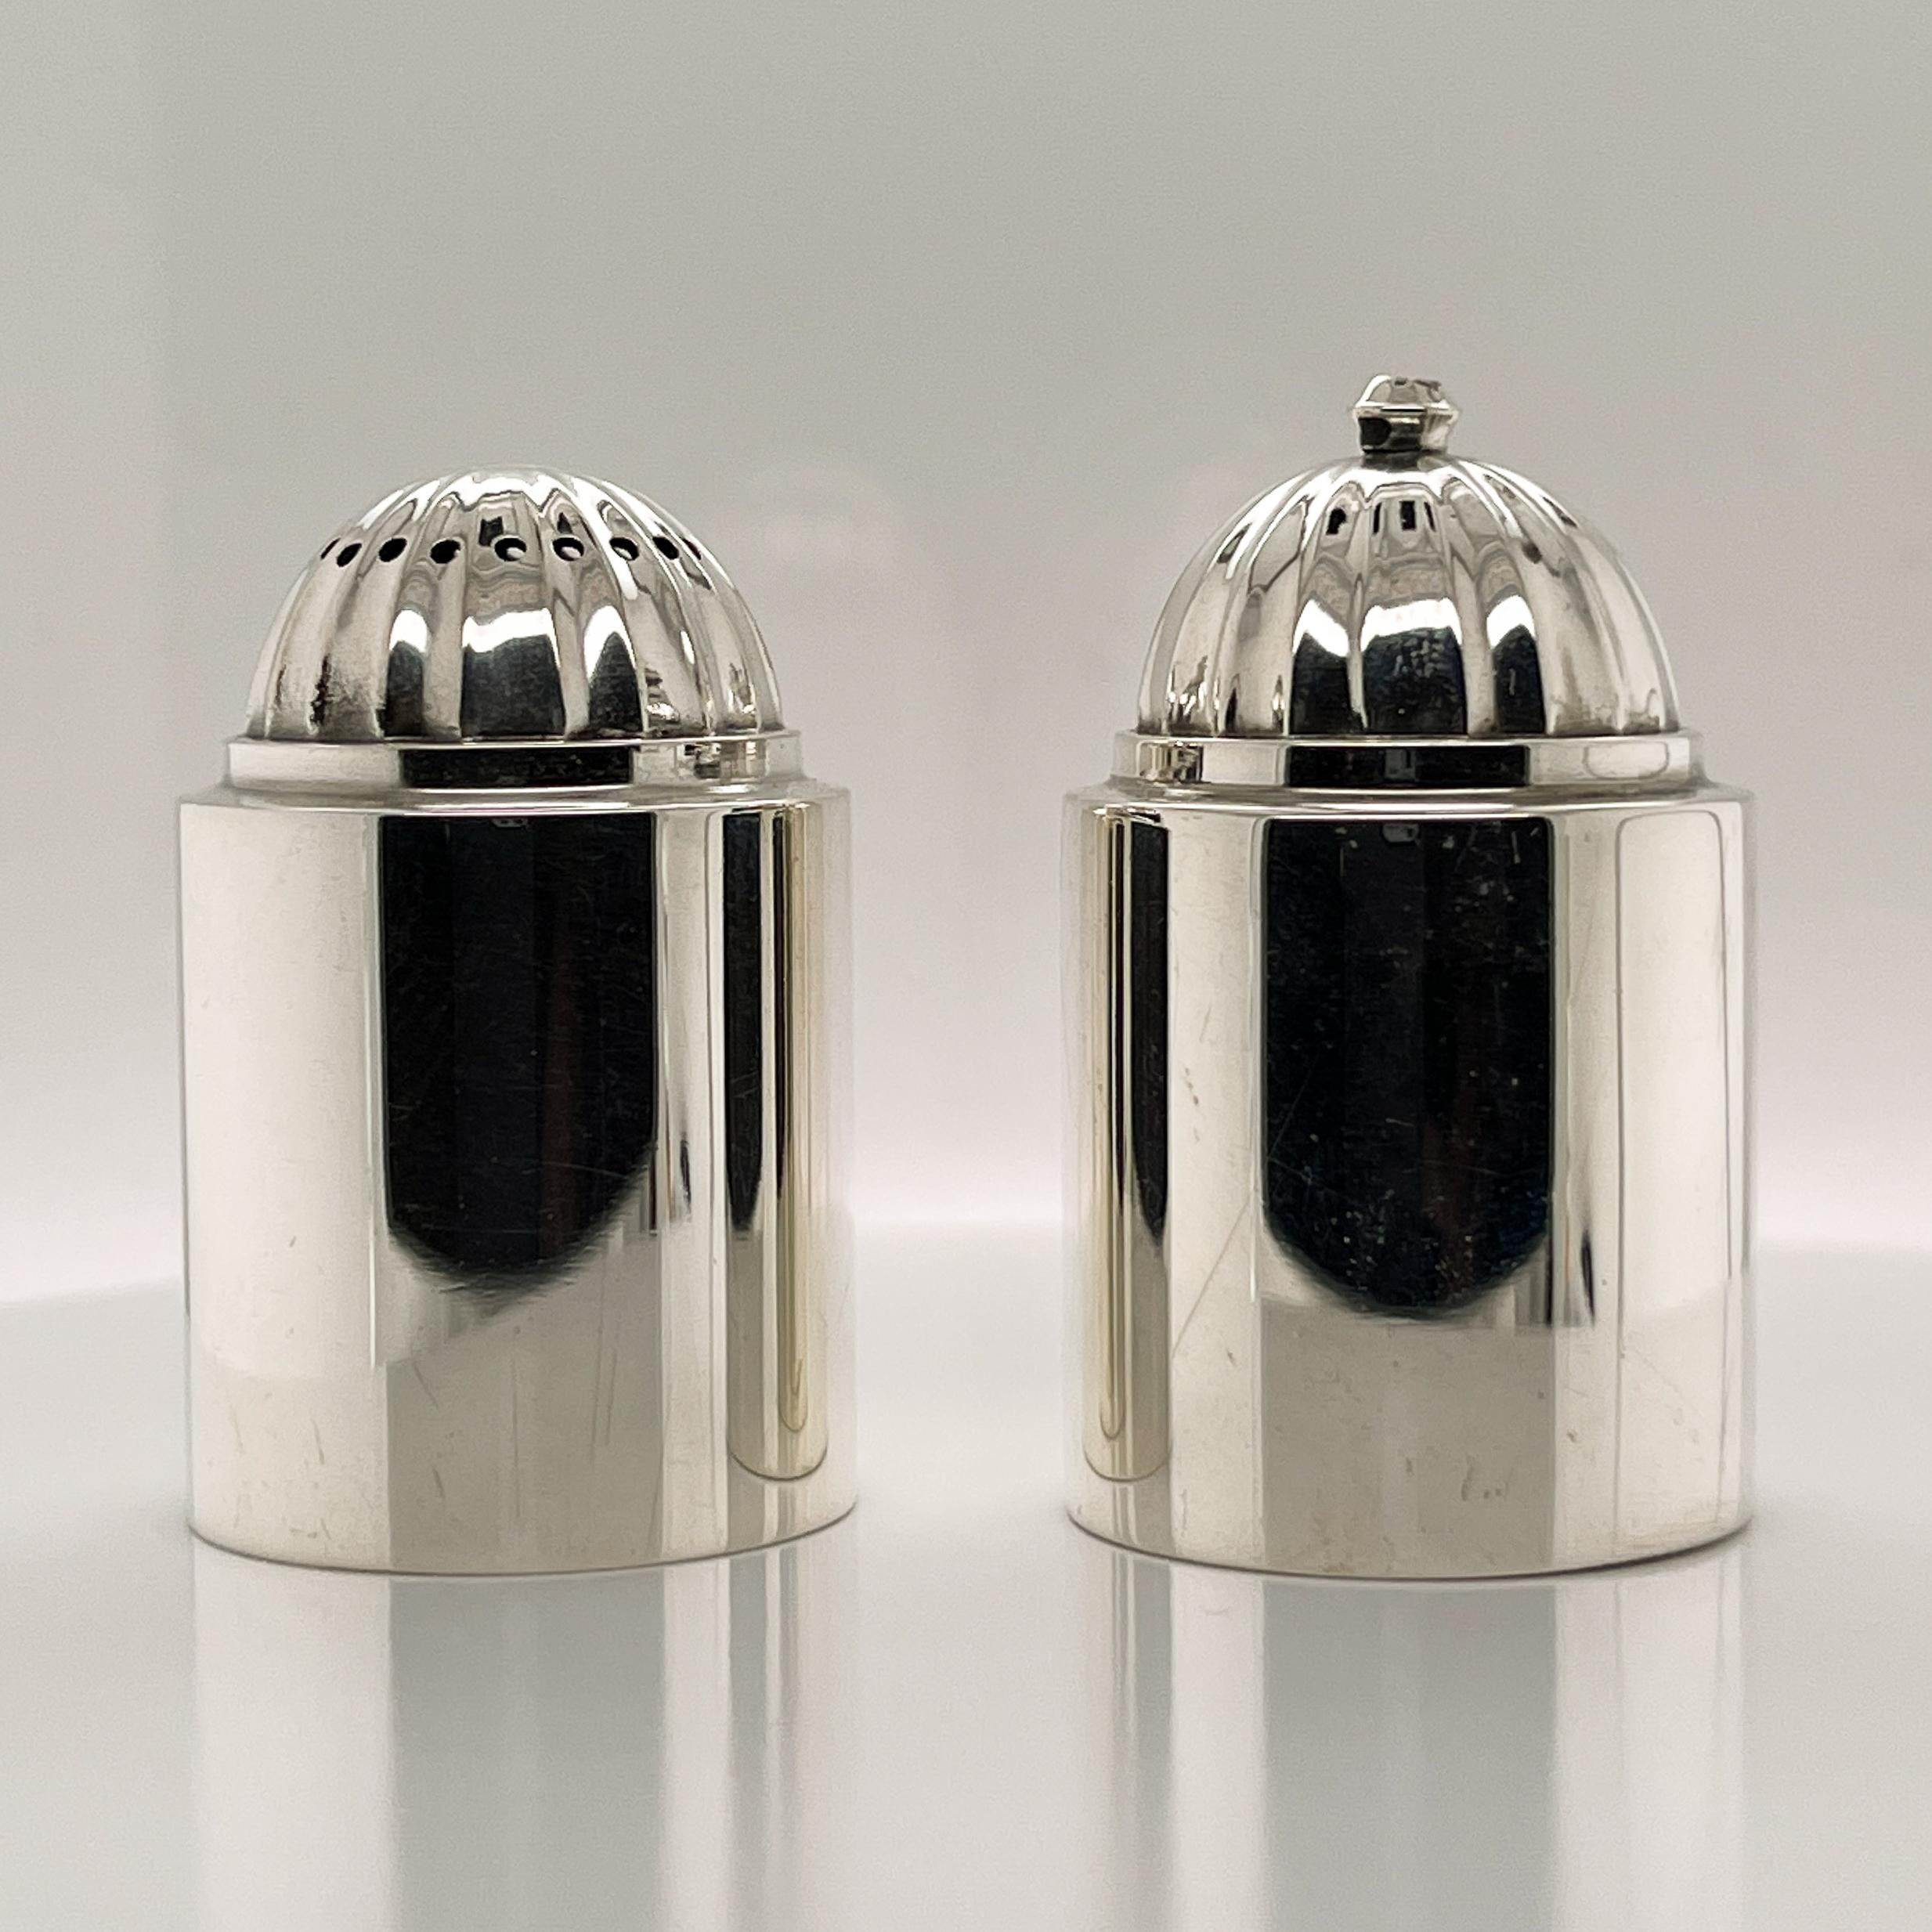 A rare pair of Georg Jensen sterling silver salt and pepper shakers.

Model No. 627. 

Designed by Ove Brobeck. 

A rare and fine pair!

Date:
20th Century

Overall Condition:
They are in overall good, as-pictured, used estate condition with some